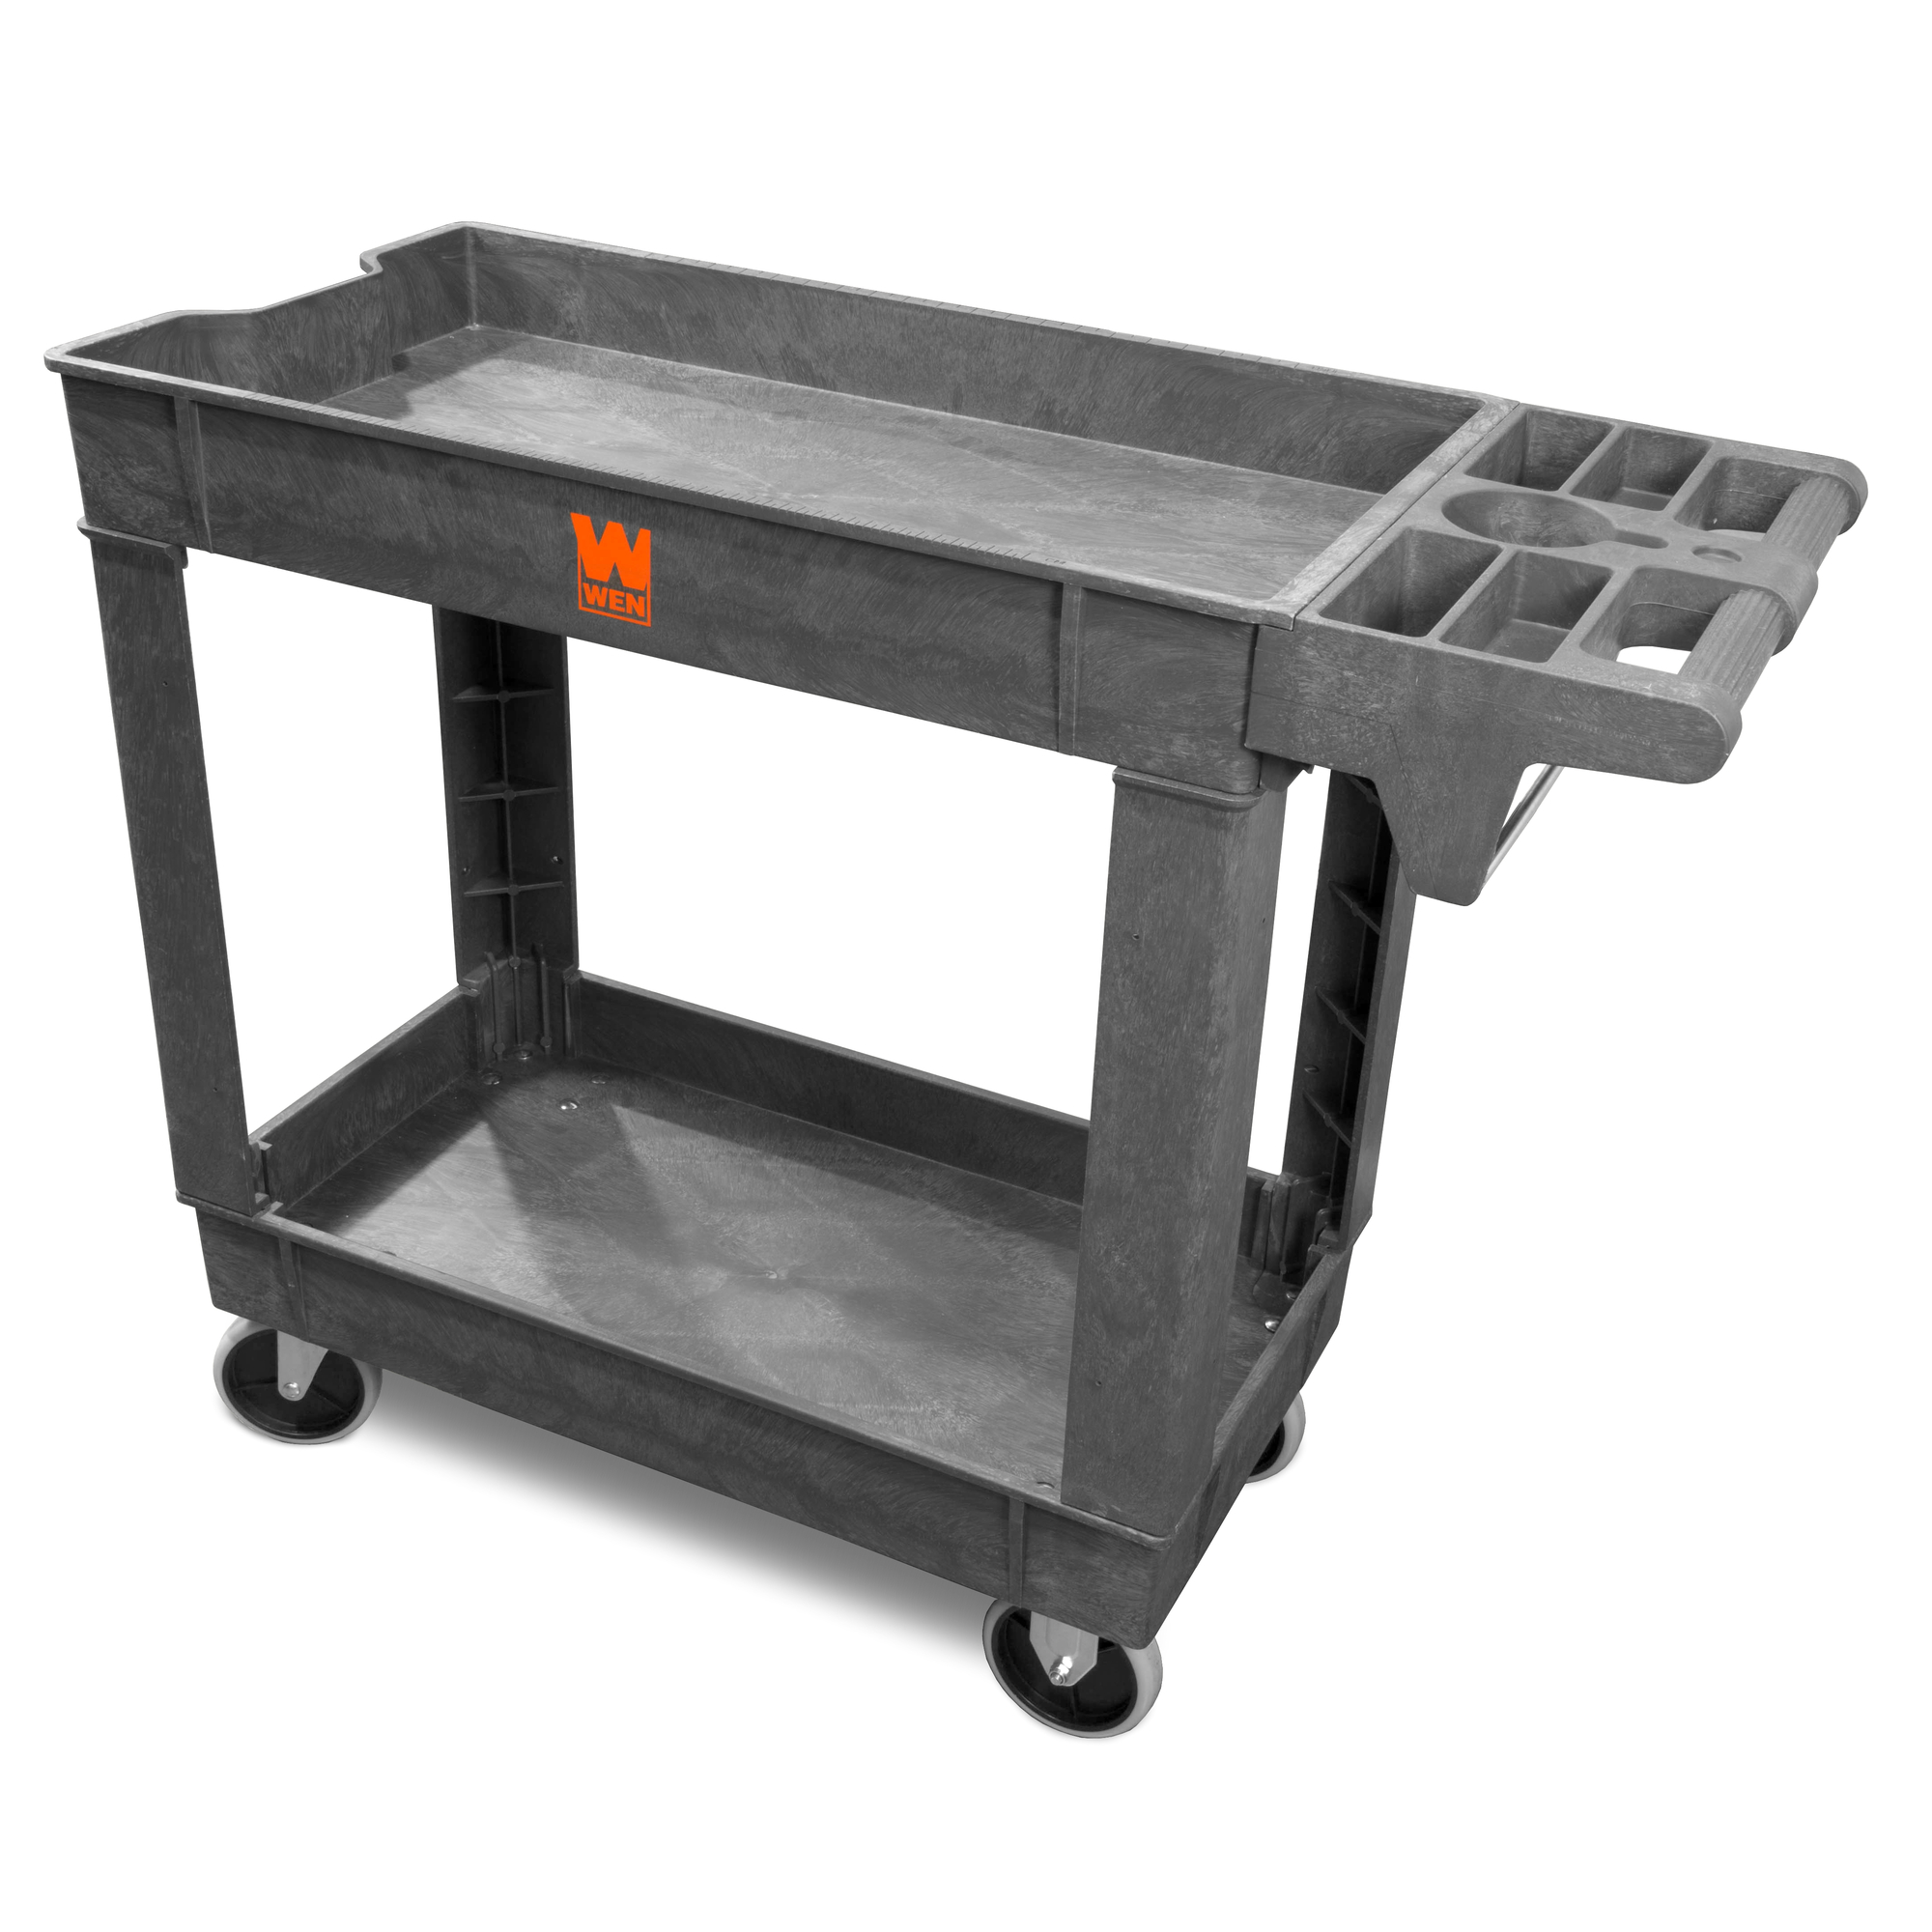 WEN, 500-Pound Capacity 40Inch x 17Inch Service Cart, Total Capacity 500 lb, Material Polypropylene, Model 73009